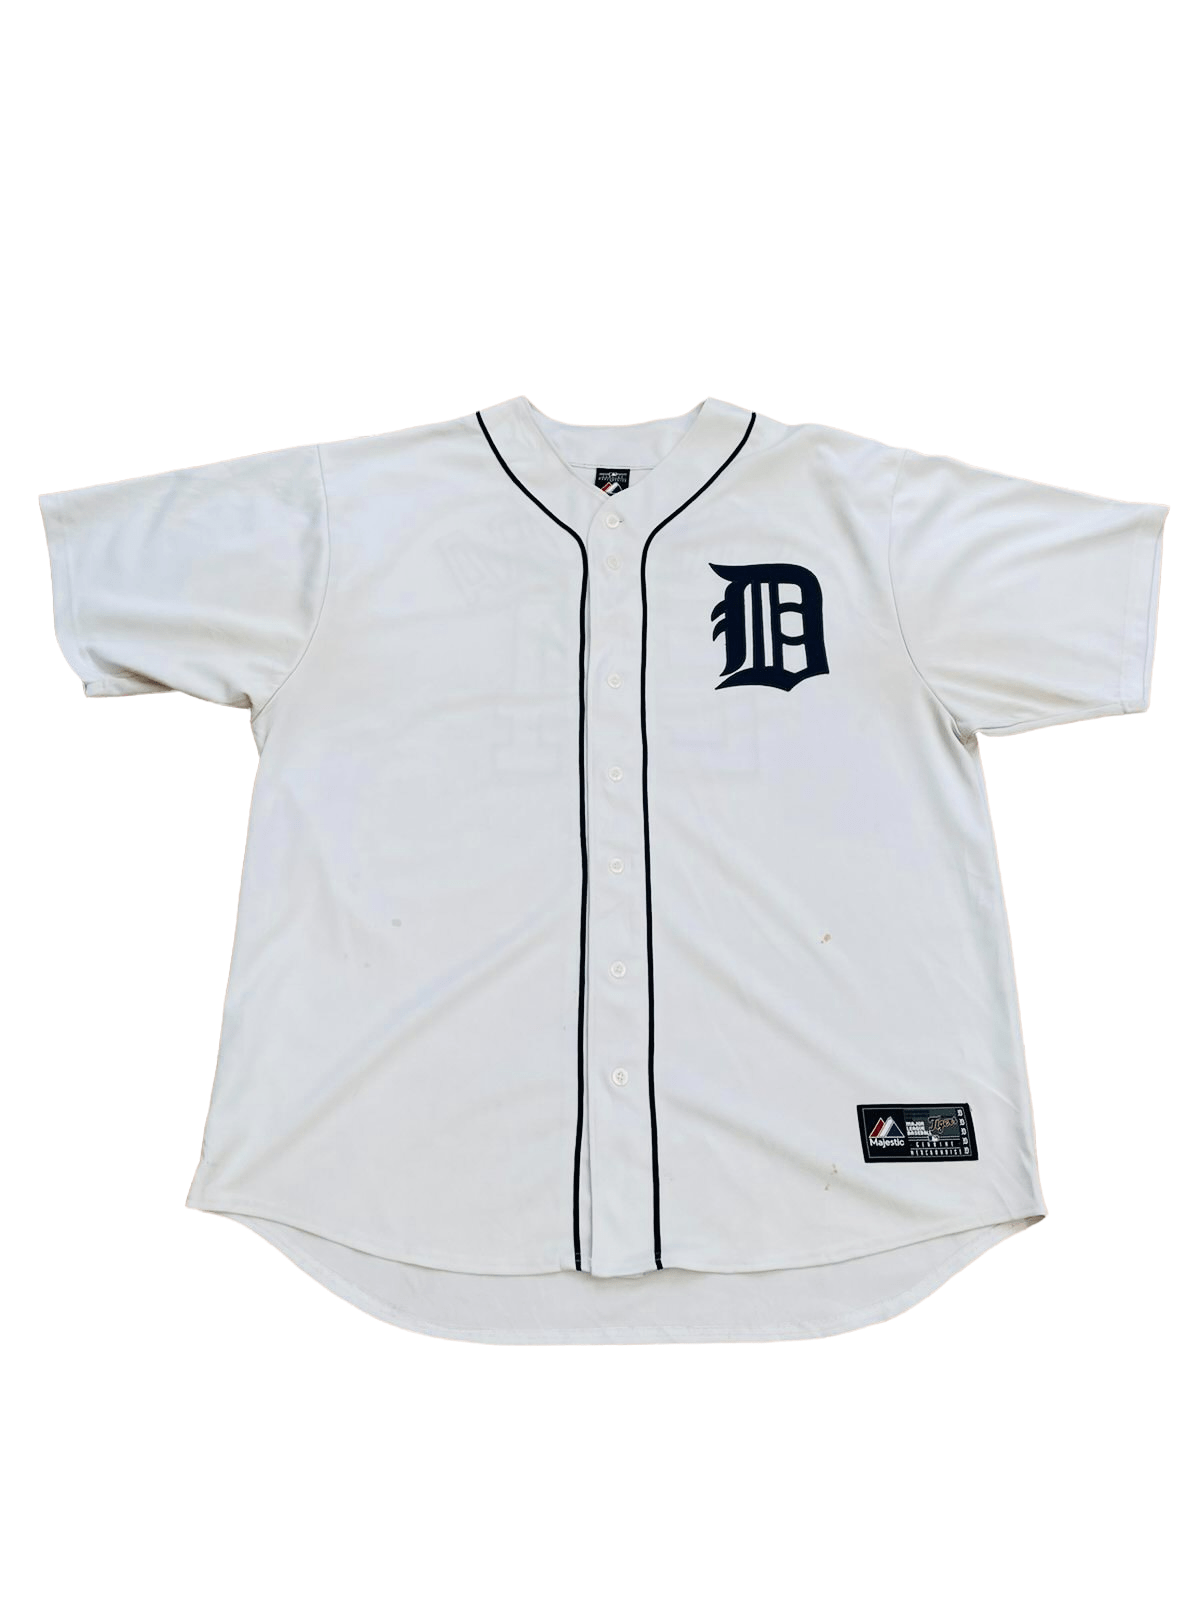 MAJESTIC MLB COOPERSTOWN COLLECTION DETROIT TIGERS GRAY ROAD JERSEY SIZE XL